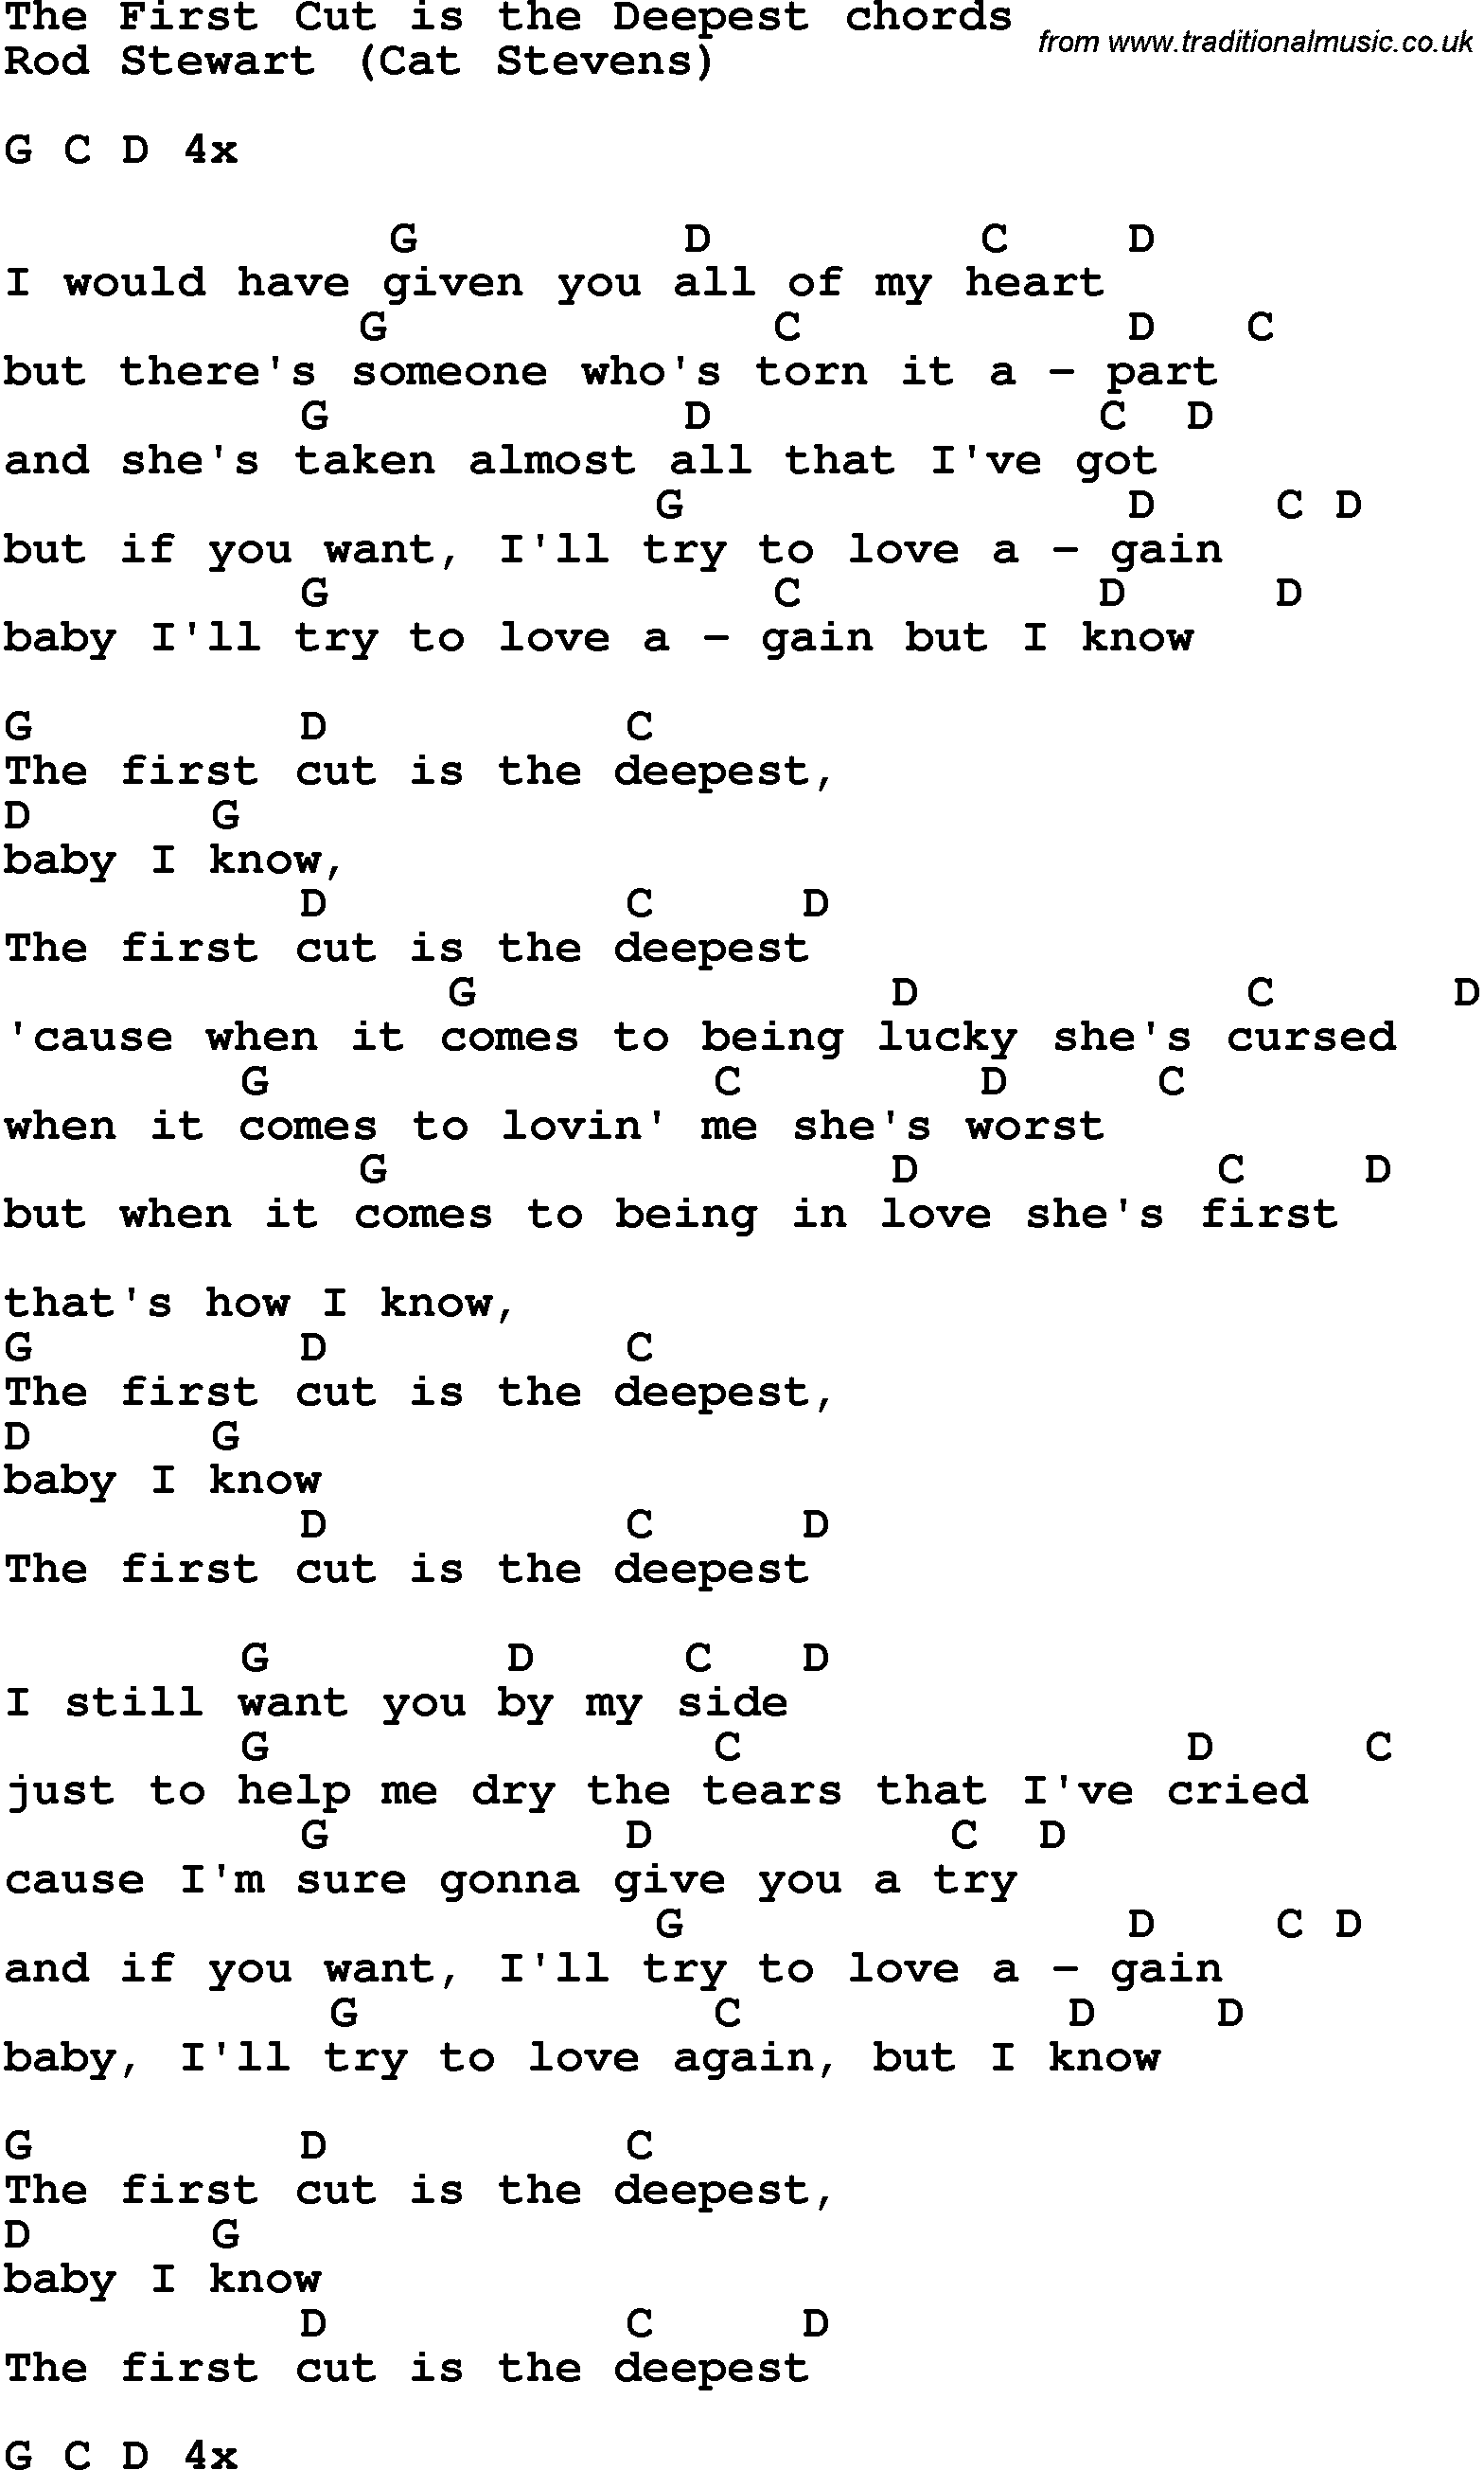 Song Lyrics with guitar chords for The First Cut Is The Deepest - Rod Stewart